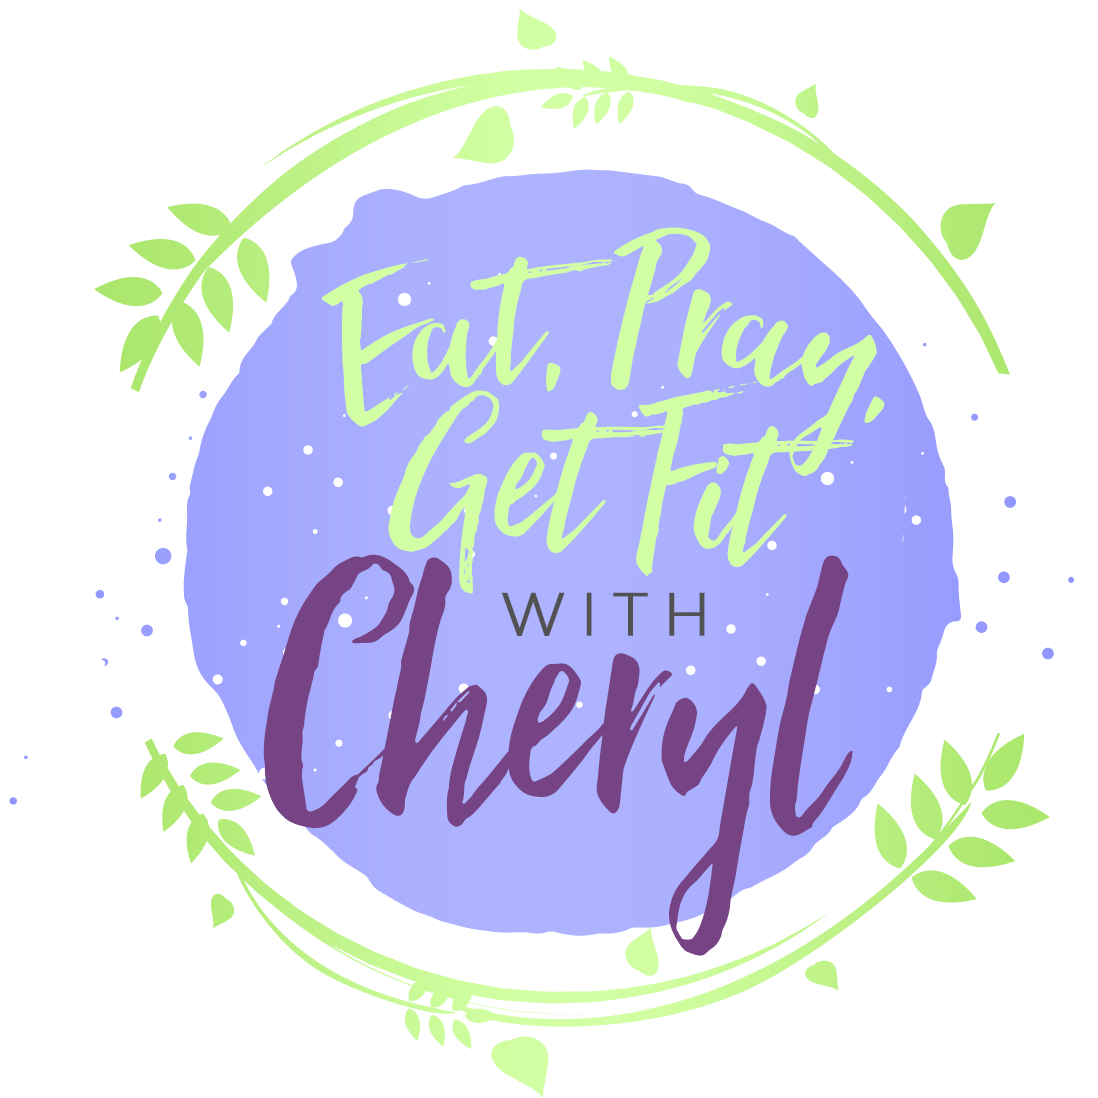 Eat Pray Get Fit with Cheryl